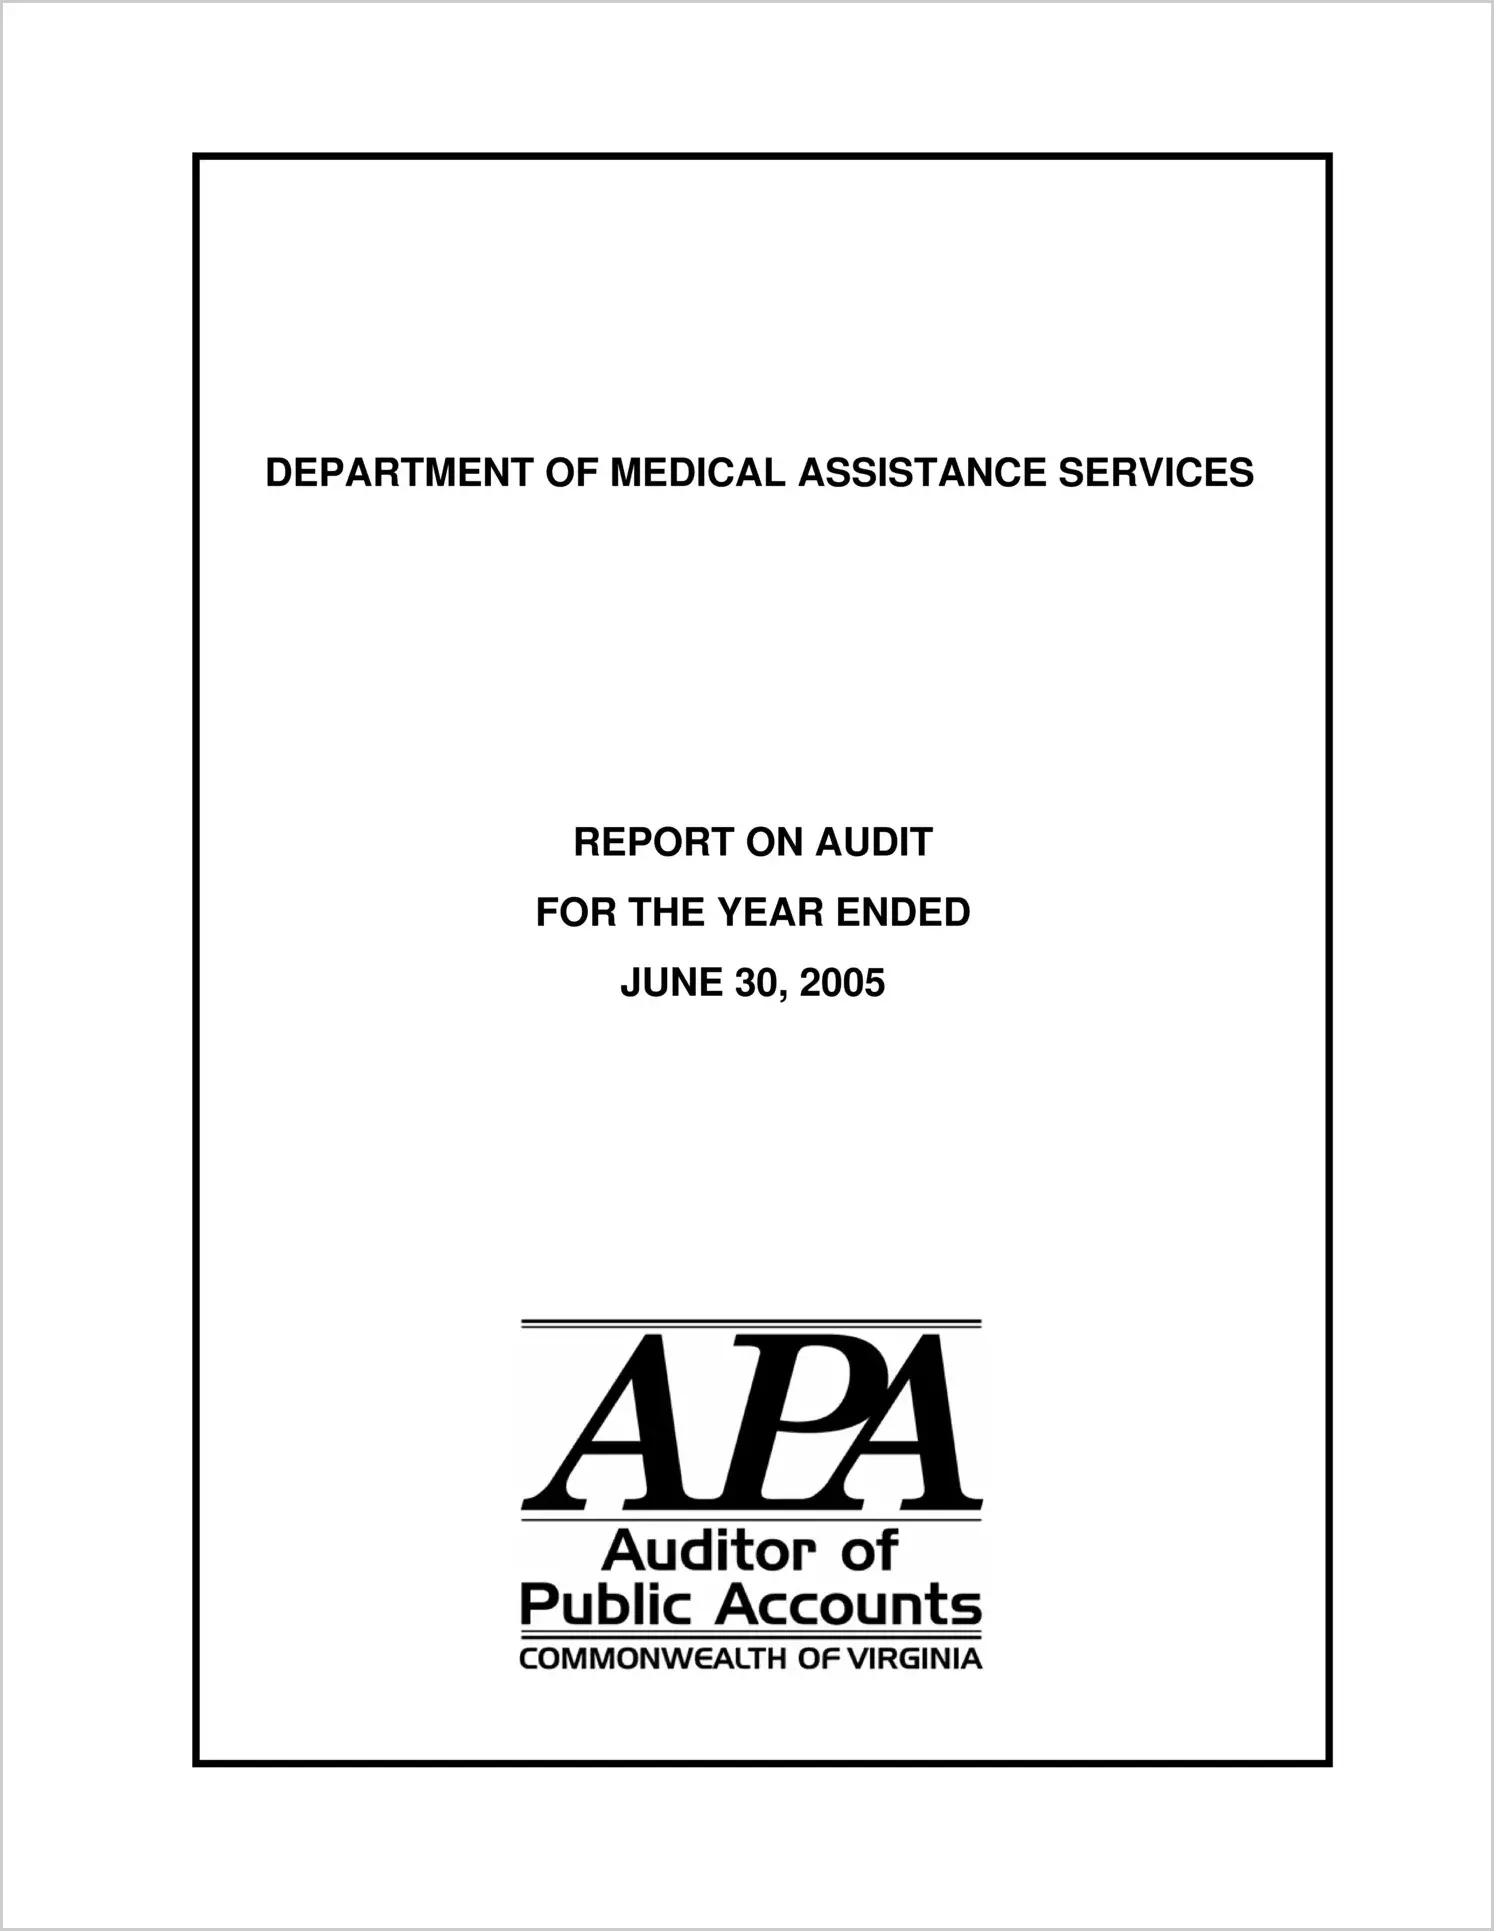 Department of Medical Assistance Services for the year ended June 30, 2005